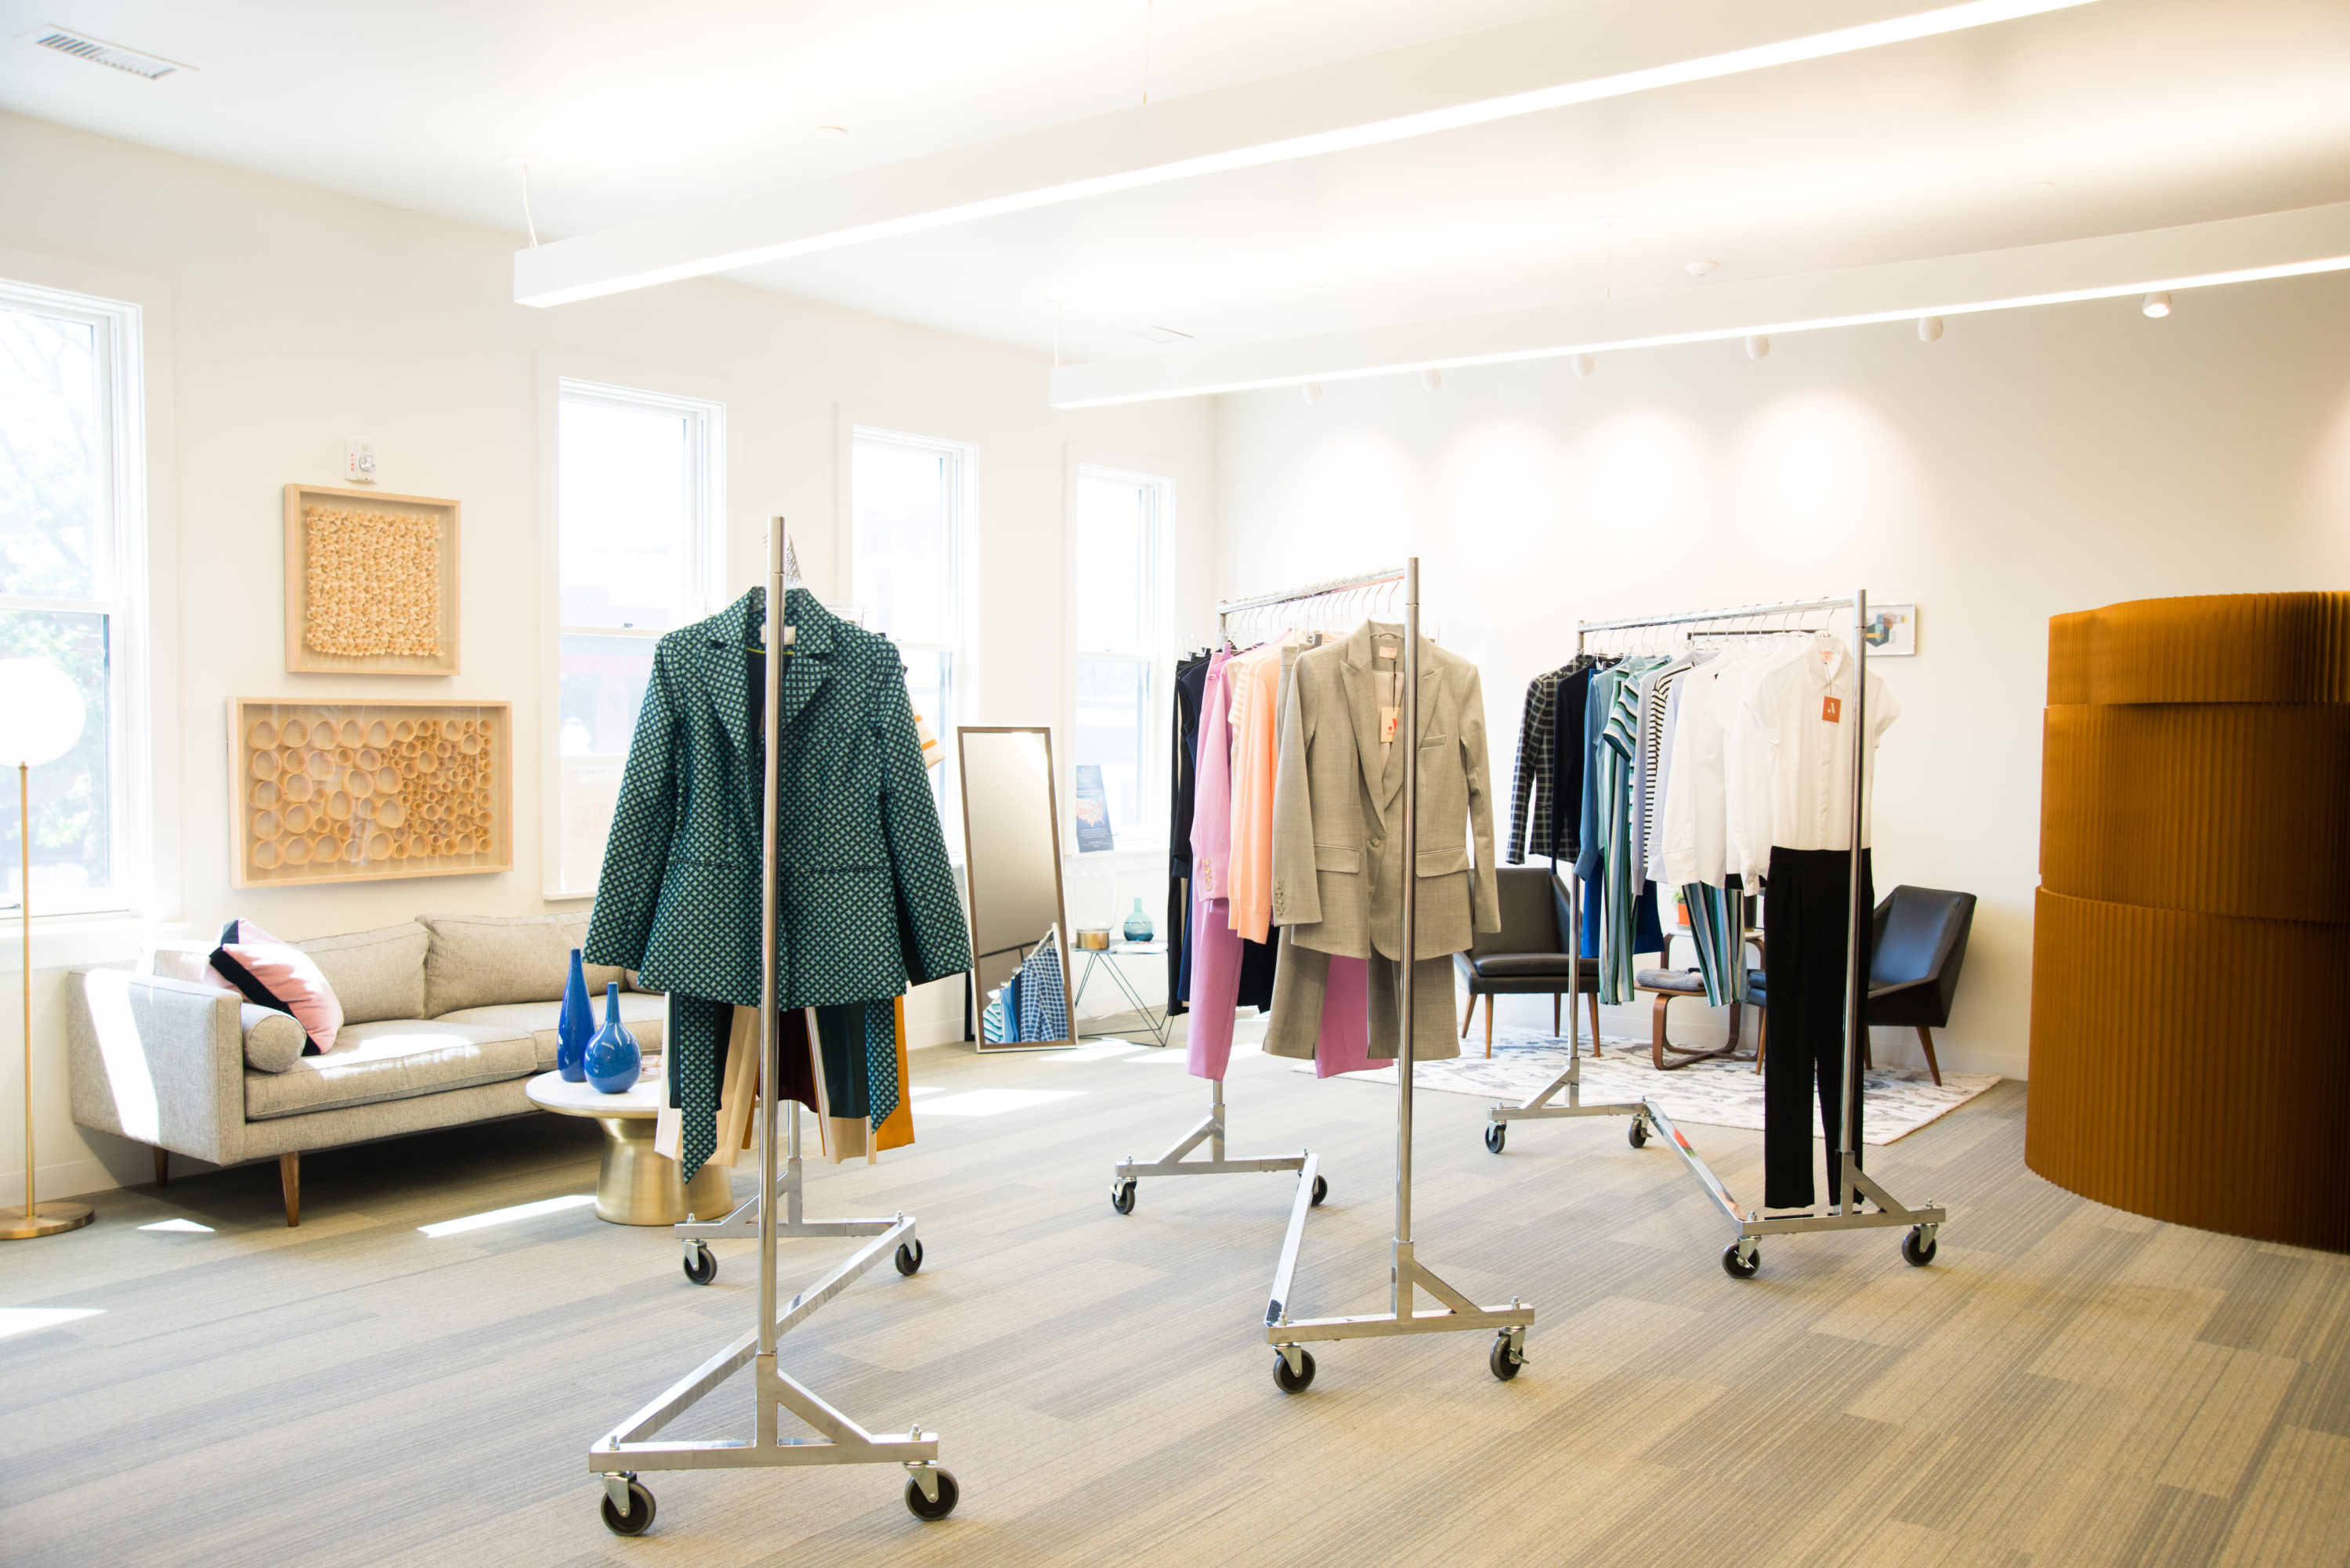 Channel HRC All Summer Long With Argent Workwear's Pop-Up at the Shay |  Washingtonian (DC)